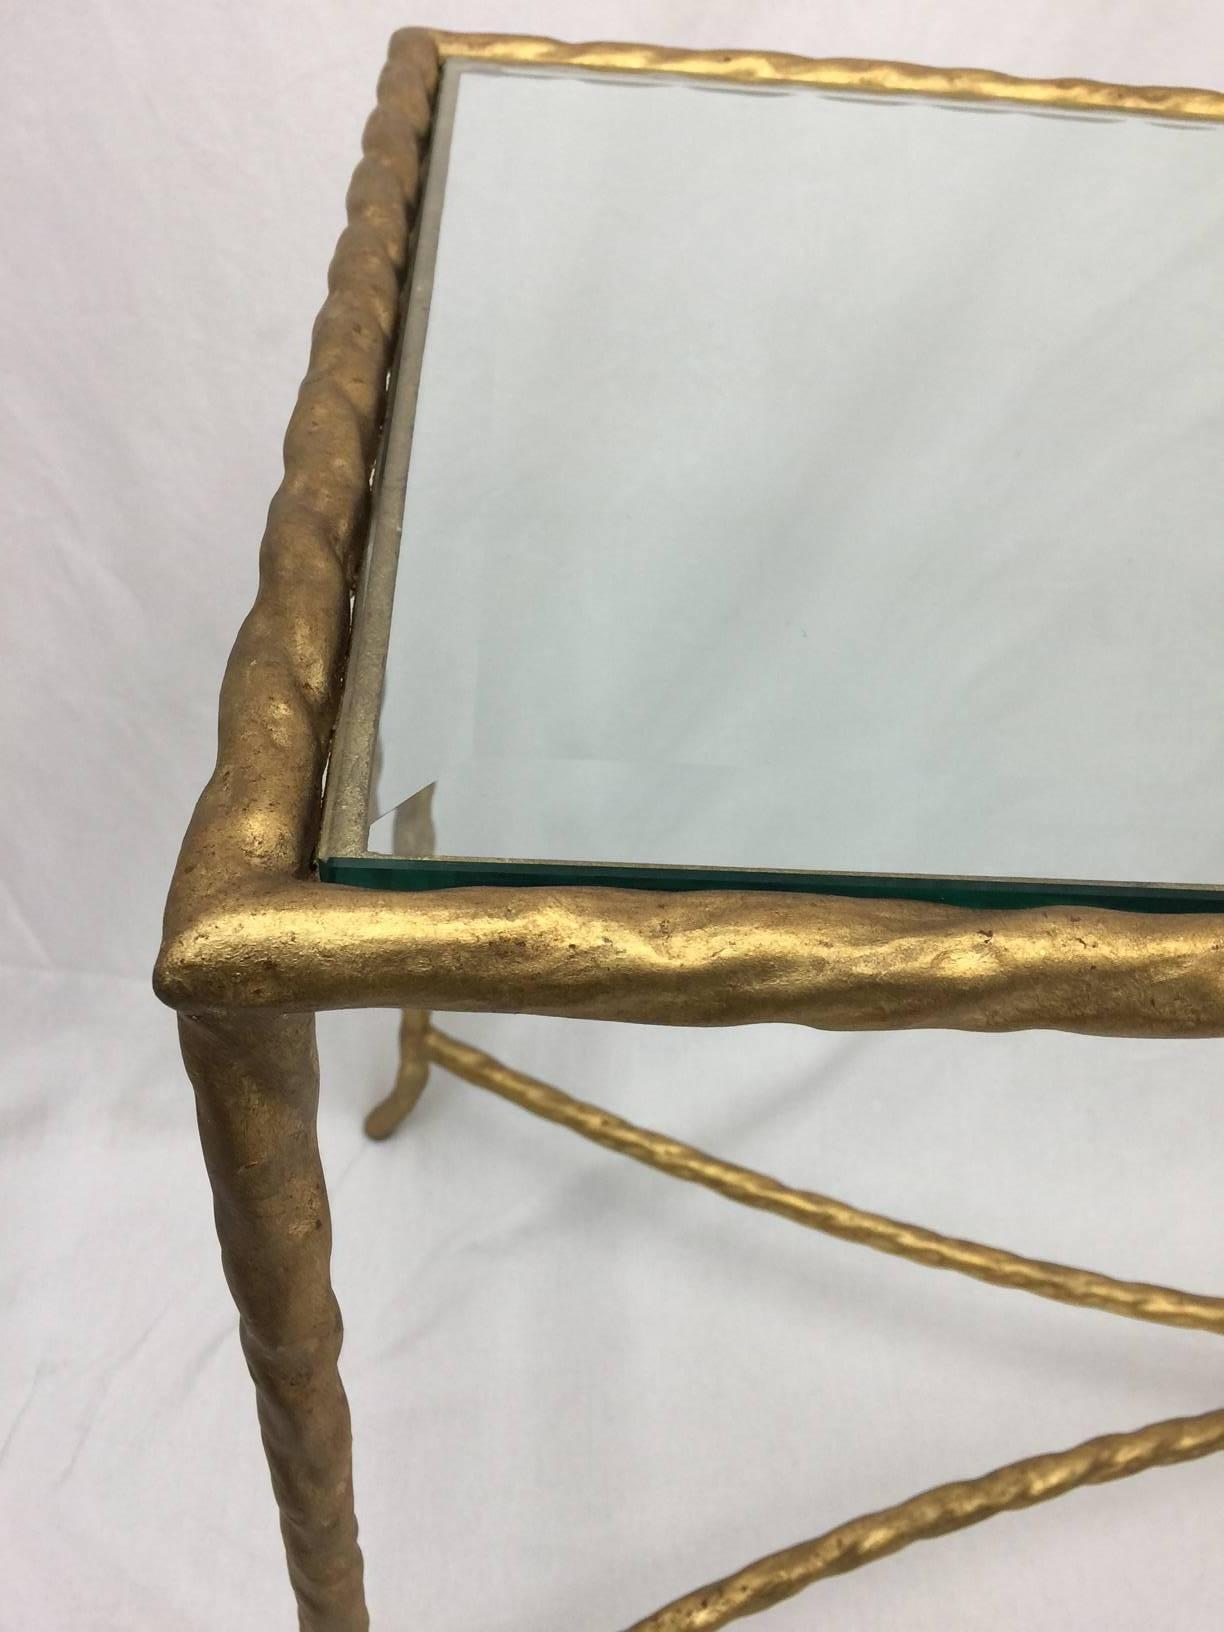 This table is the perfect simple grace note for your foyer or behind your sofa.  Beveled glass, simple cross bars, all made from the same gold metal rope.  This piece will complement any interior style from traditional to asian, to contemporary.